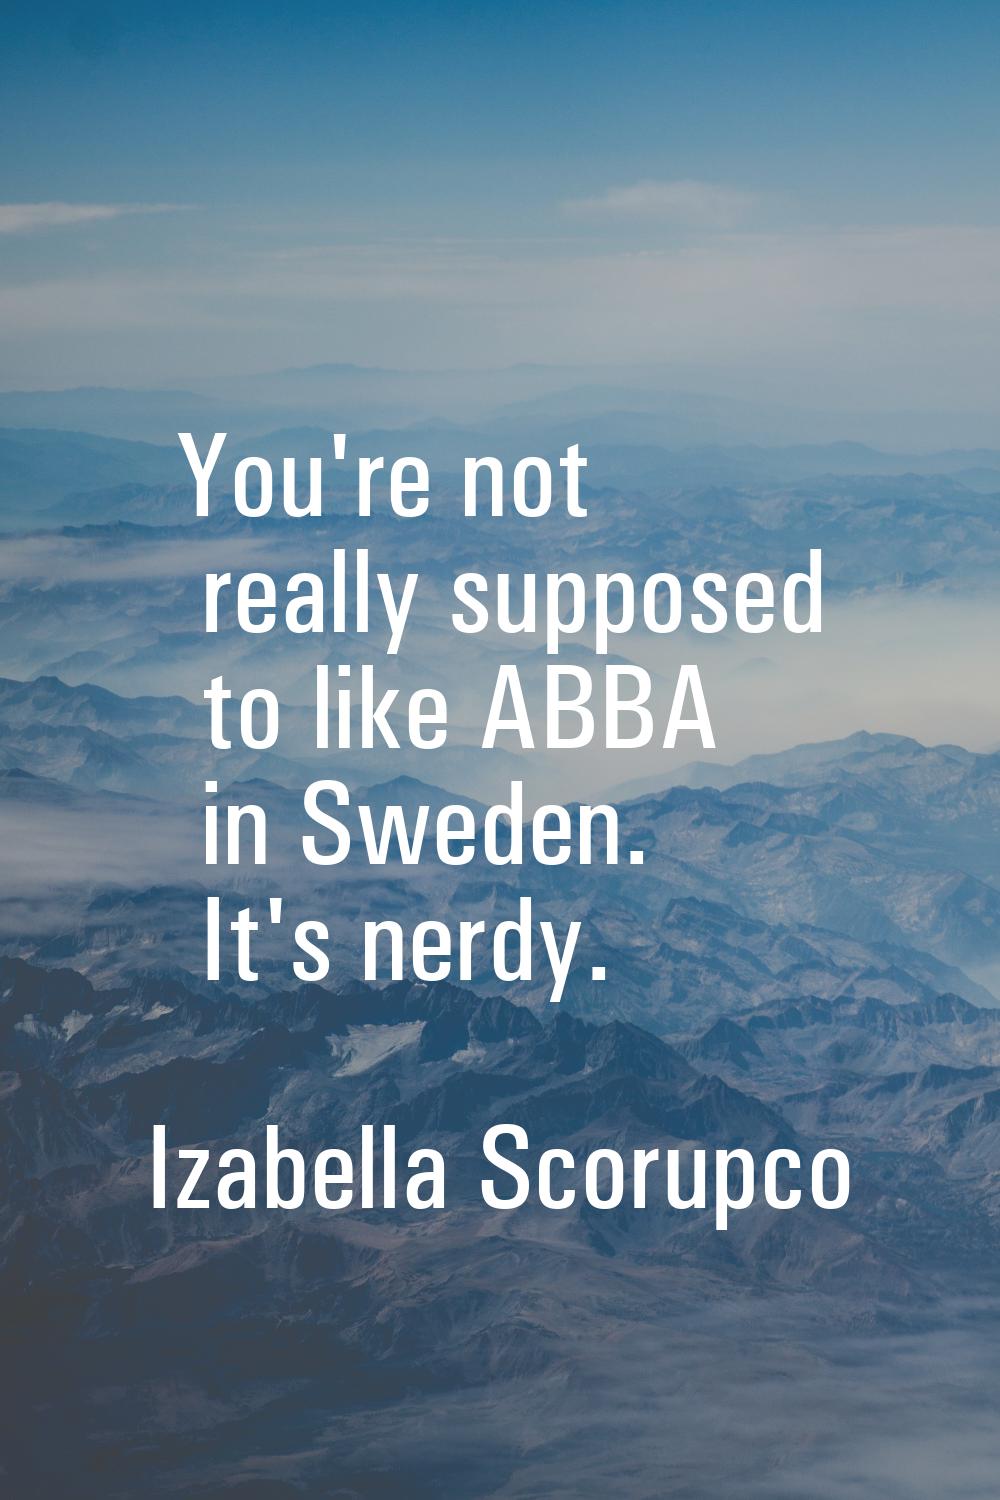 You're not really supposed to like ABBA in Sweden. It's nerdy.